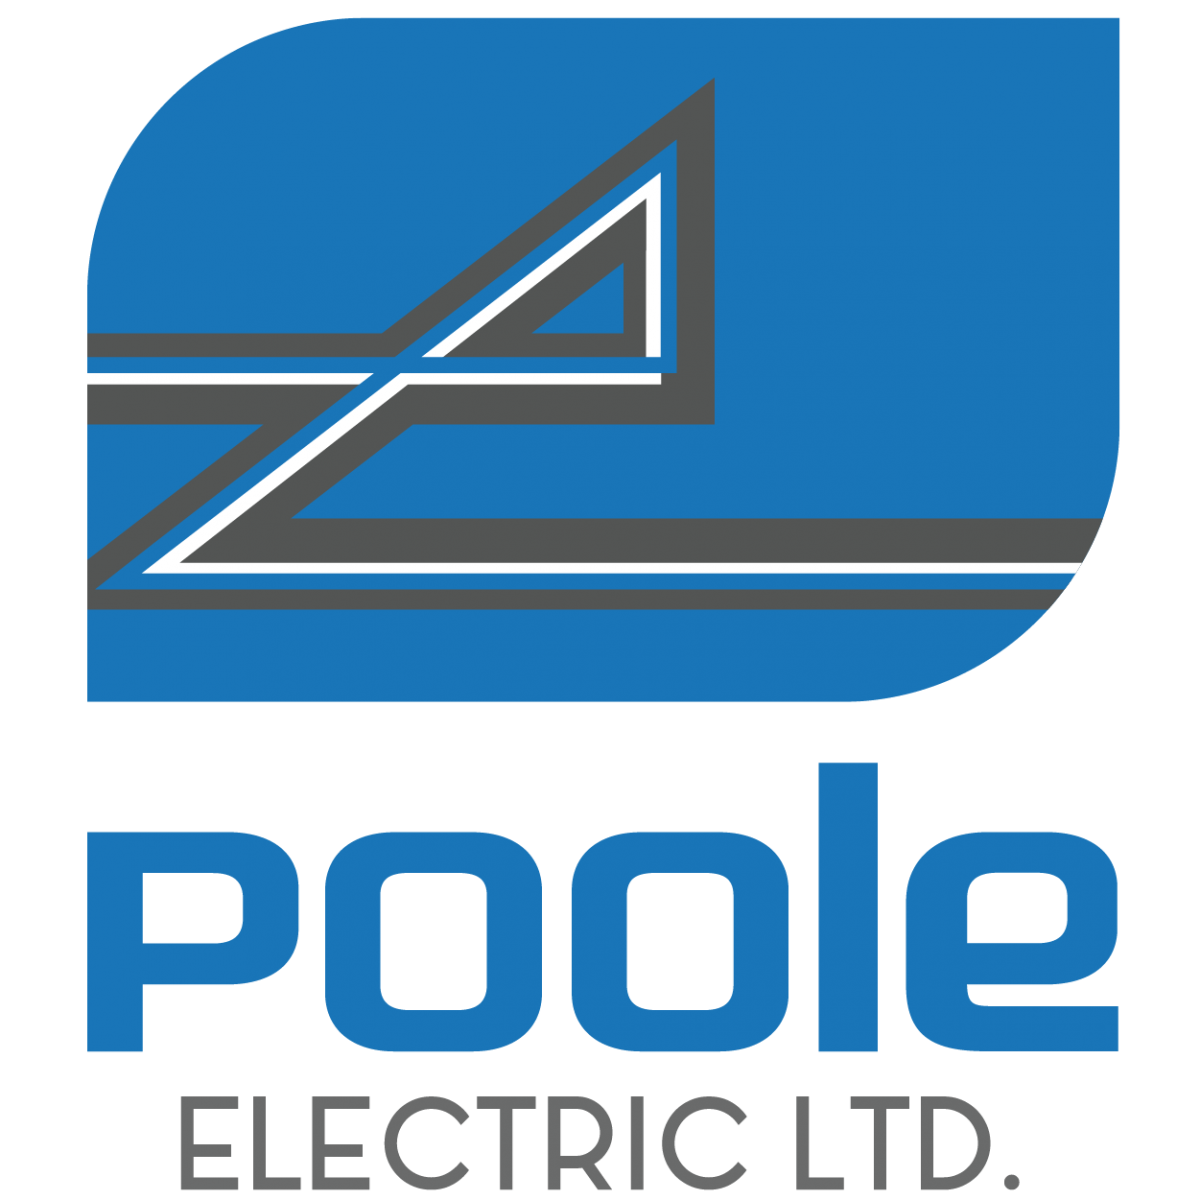 The Poole Electric logo which is a blue square with two opposite rounded edges.